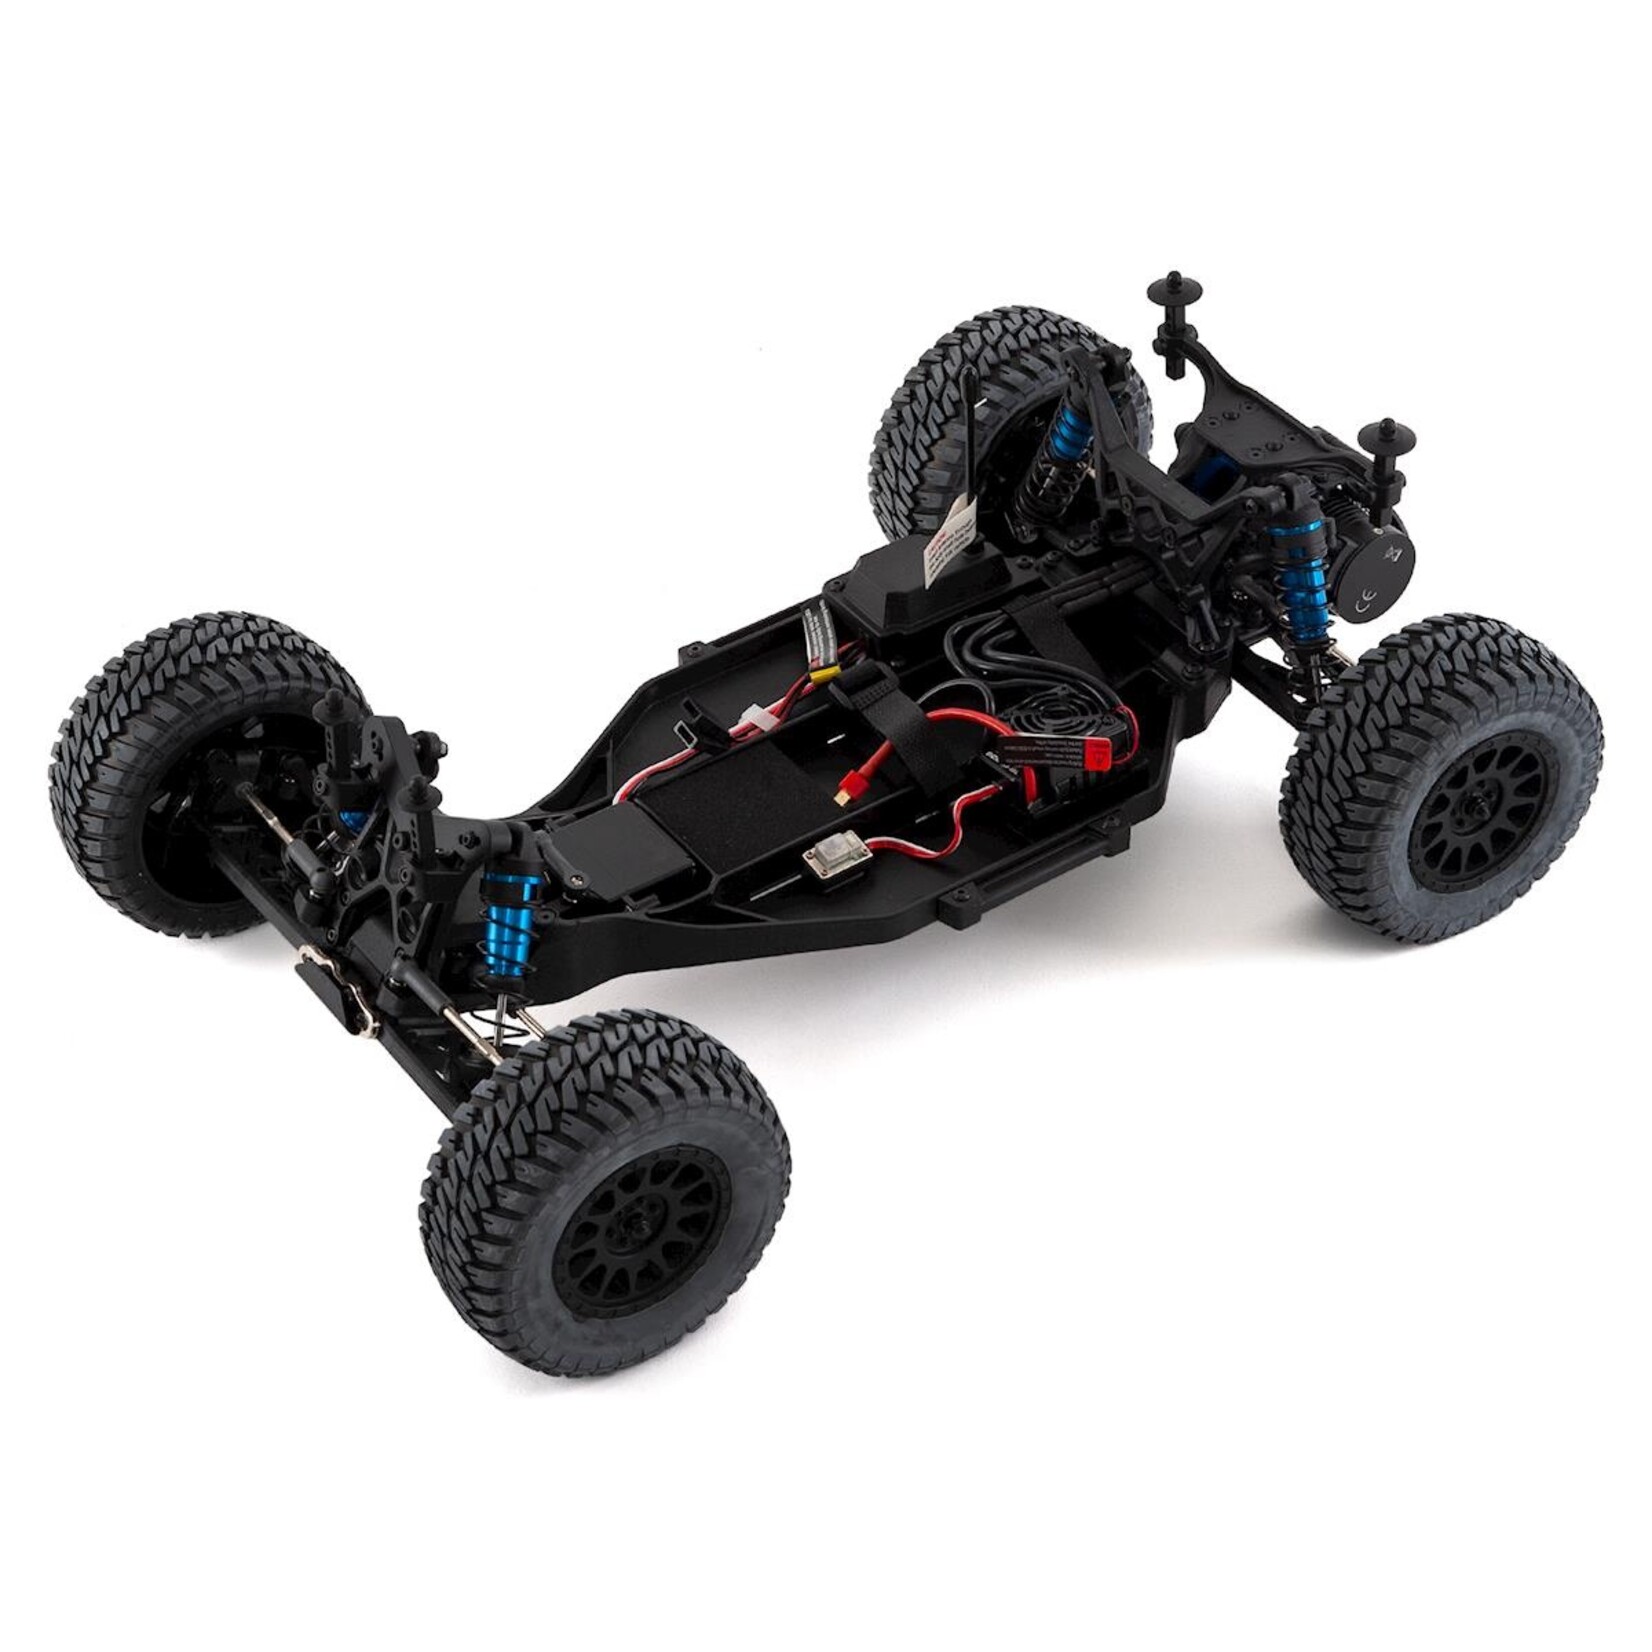 Team Associated Team Associated Trophy Rat RTR 1/10 Electric 2WD Brushless Truck Combo w/2.4GHz Radio, Battery & Charger #70019C